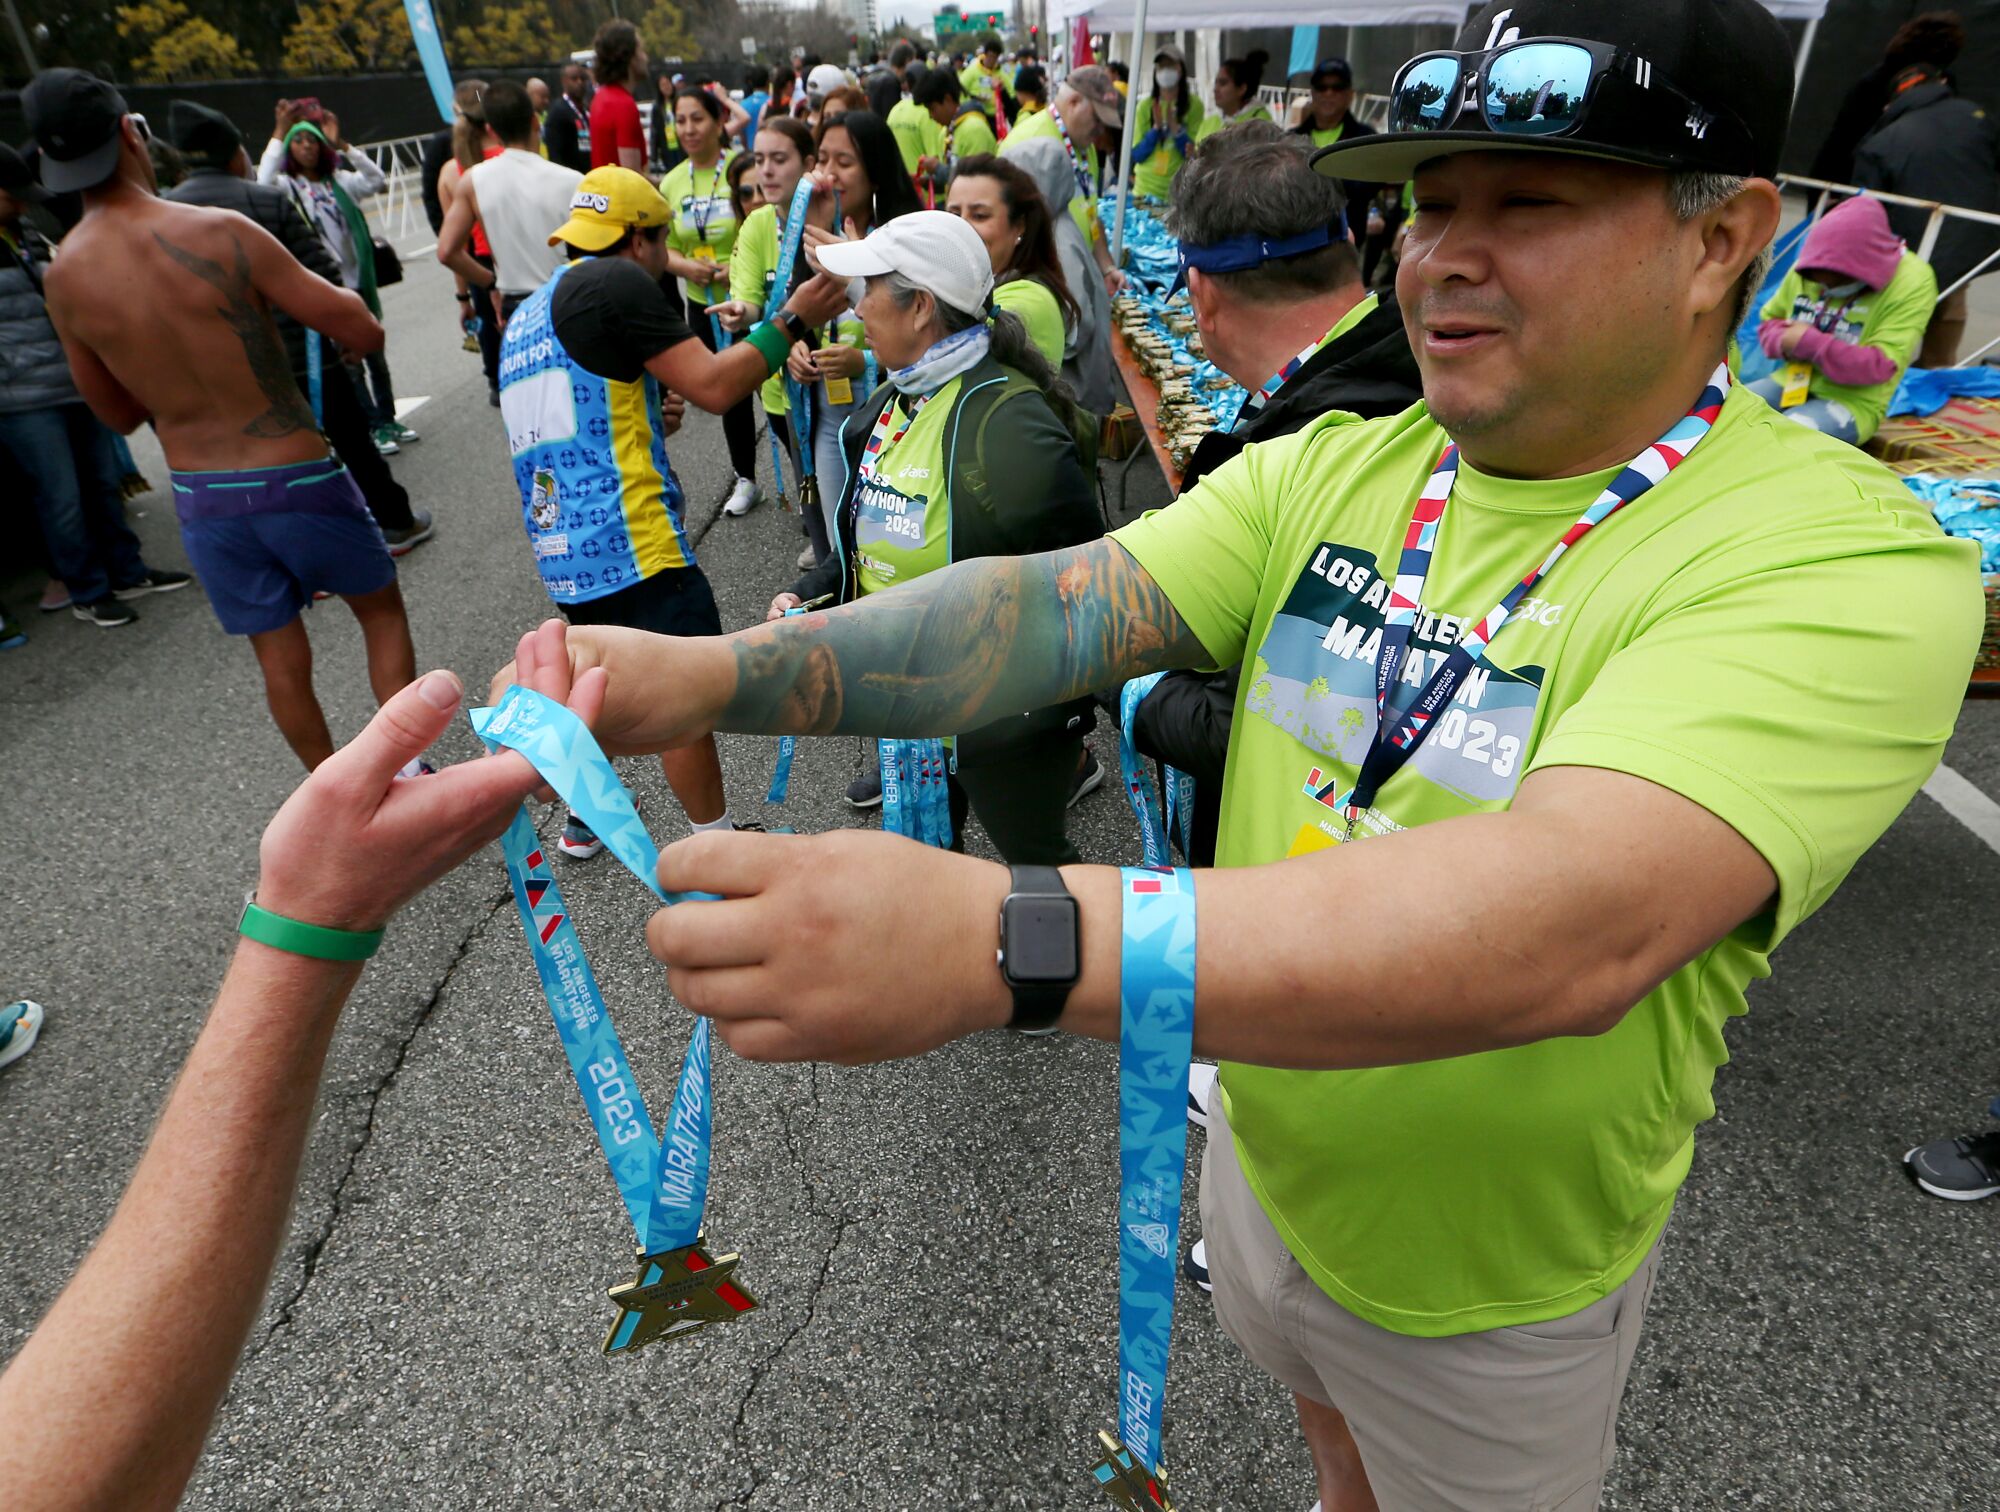 Volunteers present medals to runners for finishing the Los Angeles Marathon.